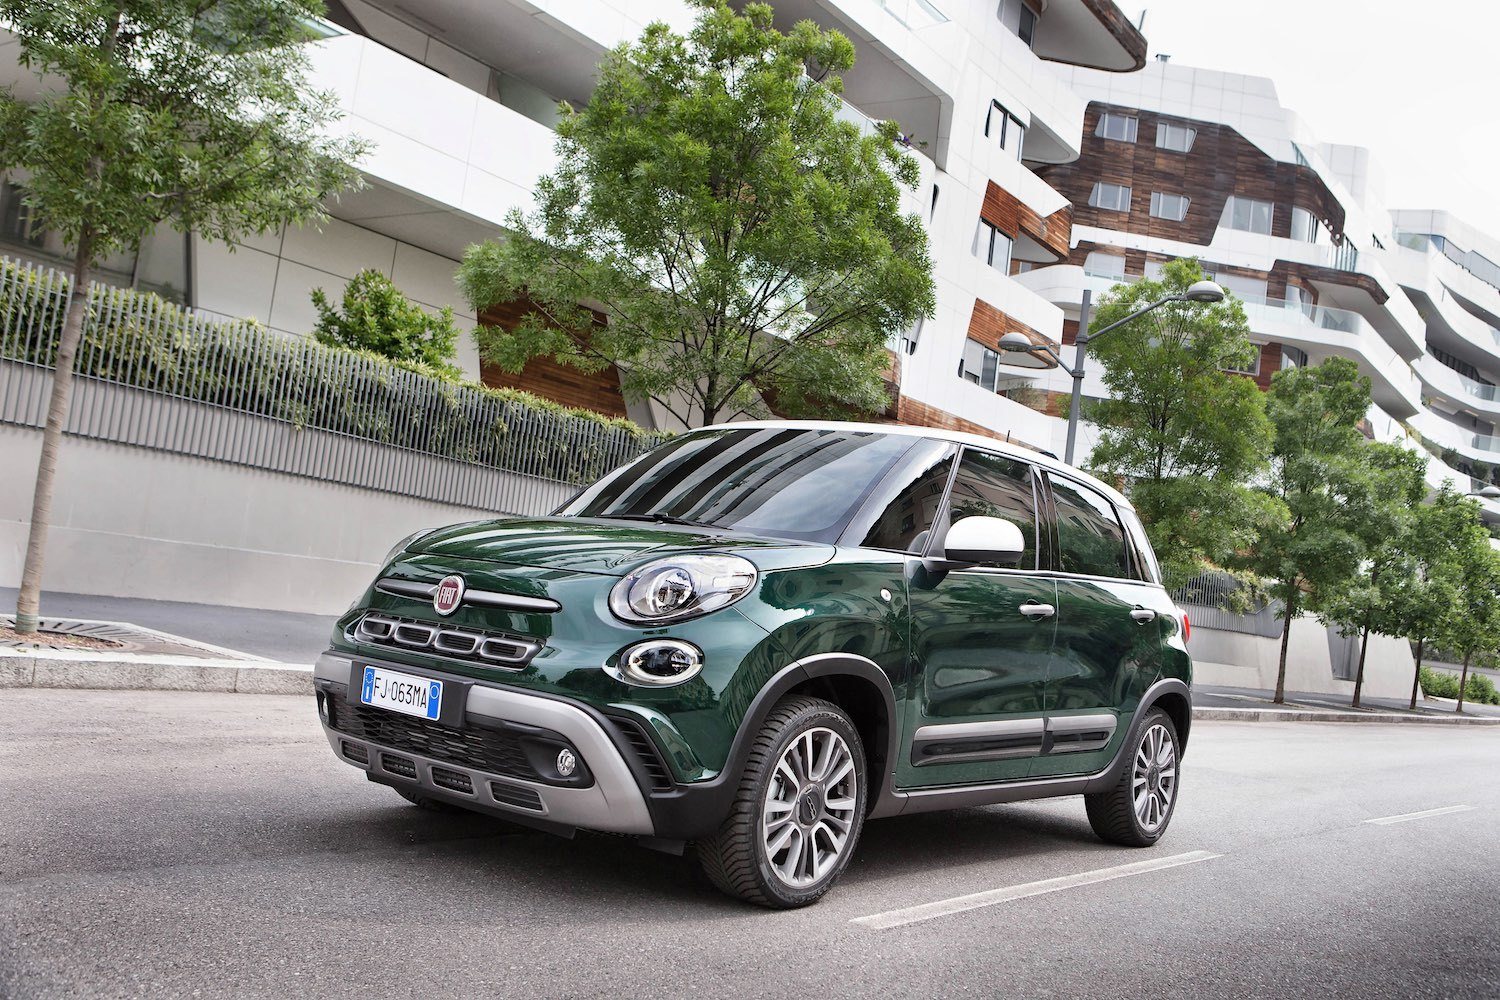 Tim Barnes-Clay reviews the New Fiat 500L from the first drive in Italy 12